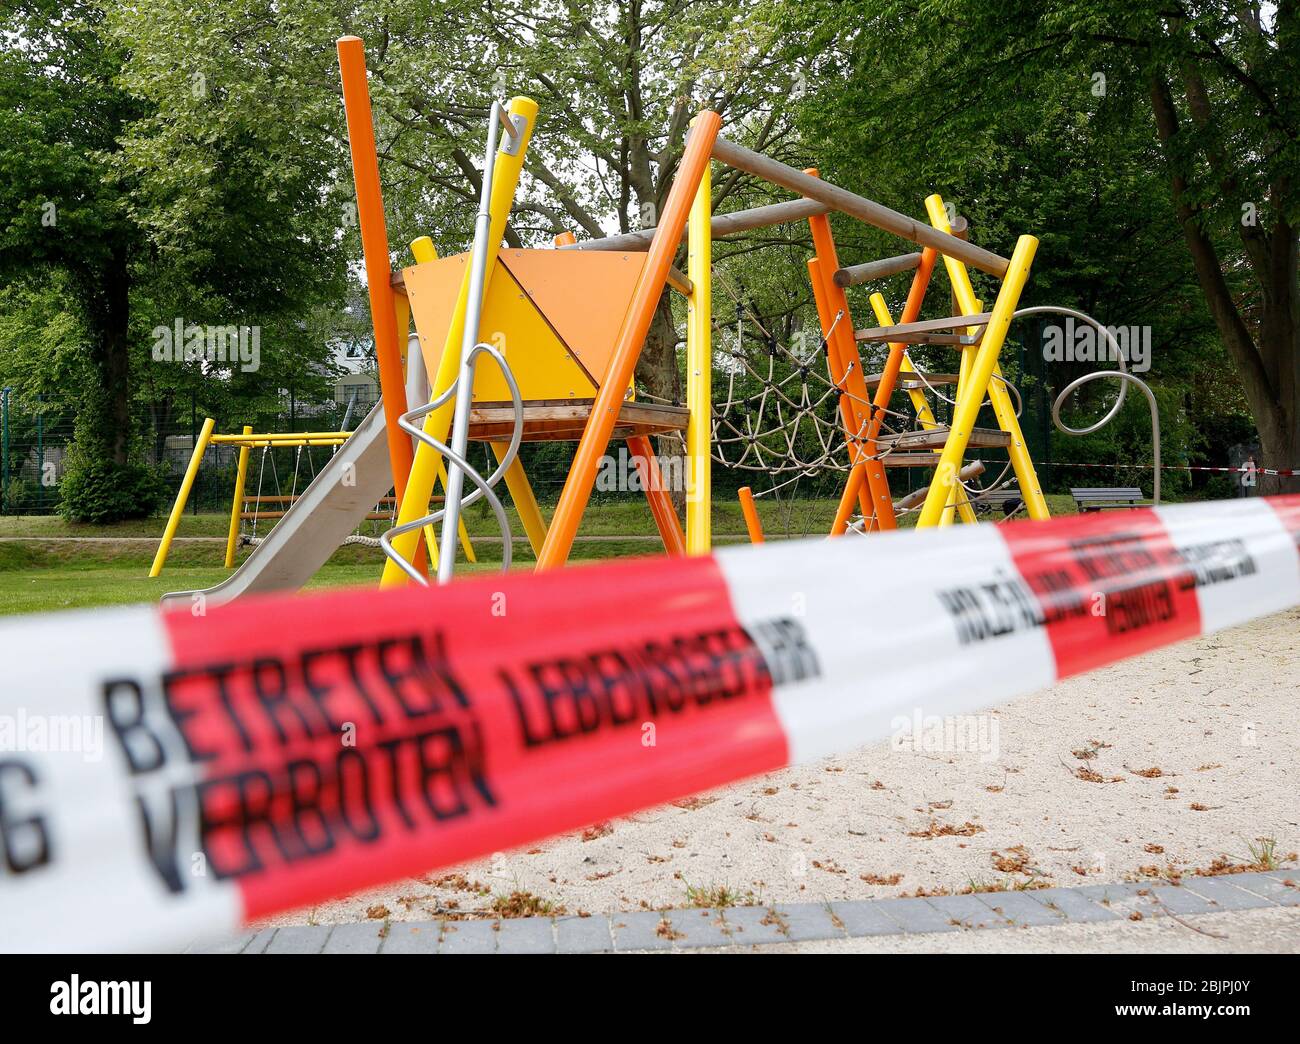 Essen, Germany. 30th Apr, 2020. A public playground is closed off with flutterband. According to the federal government's bill, the playgrounds, which have been closed for weeks, should be able to be reopened. Parents should take care to avoid overcrowded facilities and observe basic rules of hygiene. Credit: Roland Weihrauch/dpa/Alamy Live News Stock Photo